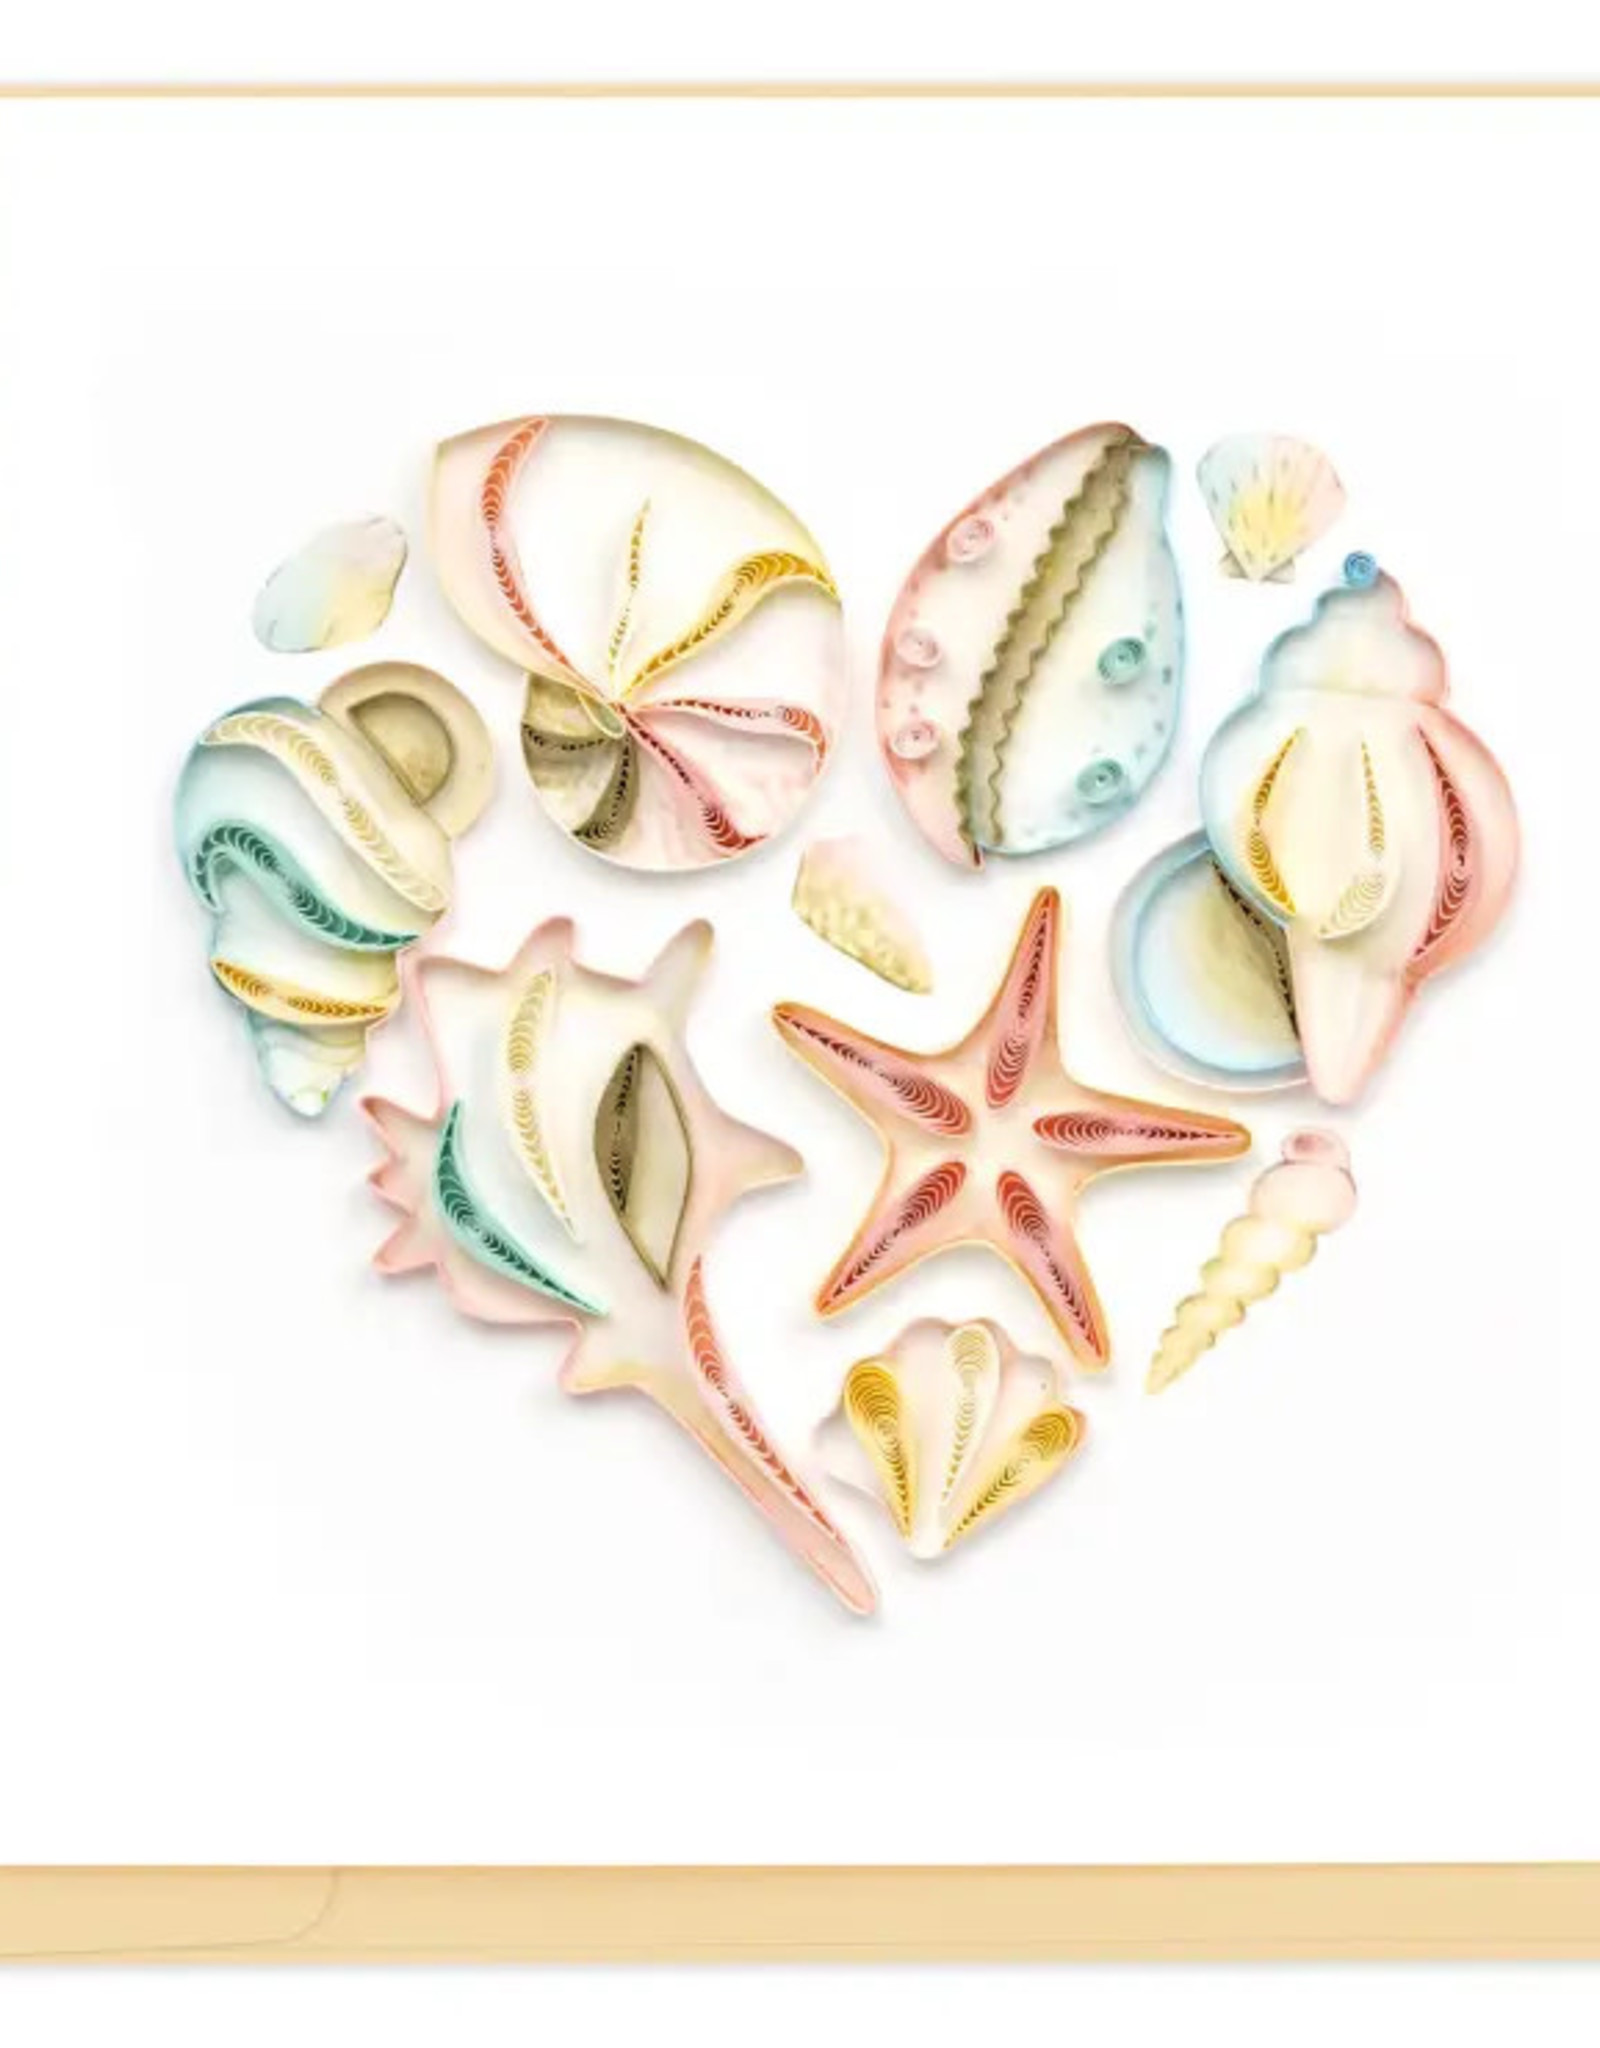 Quilling Card Quilled Seashell Heart Greeting Card